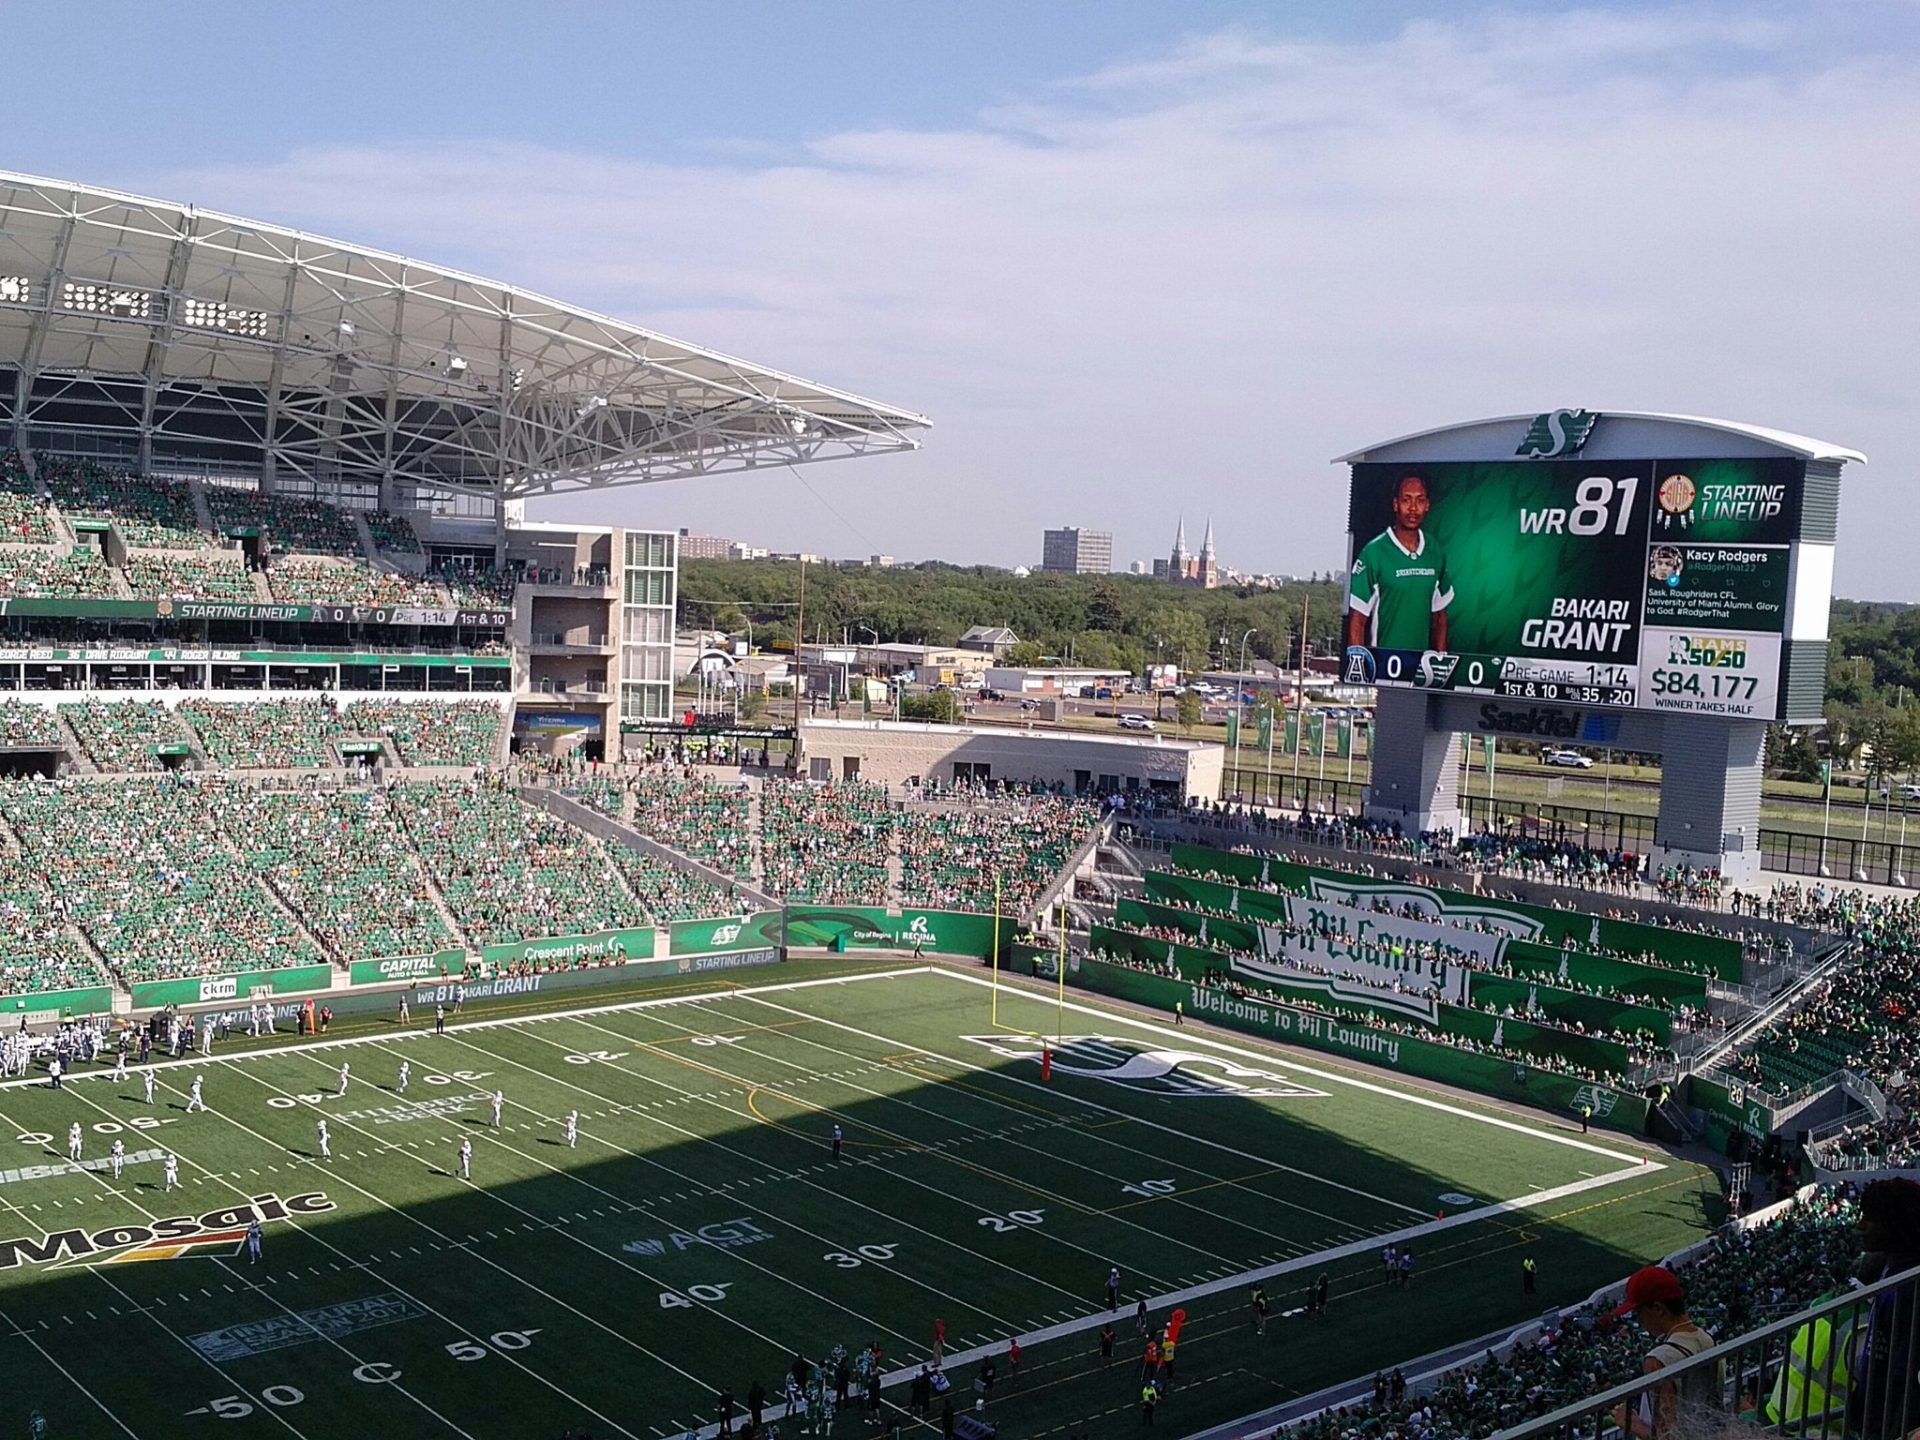 CFL, Canadian Football League, AJP, Anthony James Partners, AV Consulting, Control Room, Video Replay, Broadcast Cabling, Infrastructure Cabling, IPTV, CATV, Distributed TV, POS, Wi-Fi, Wifi, High Definition, LED Scoreboard, LED Video, LED Videoboard